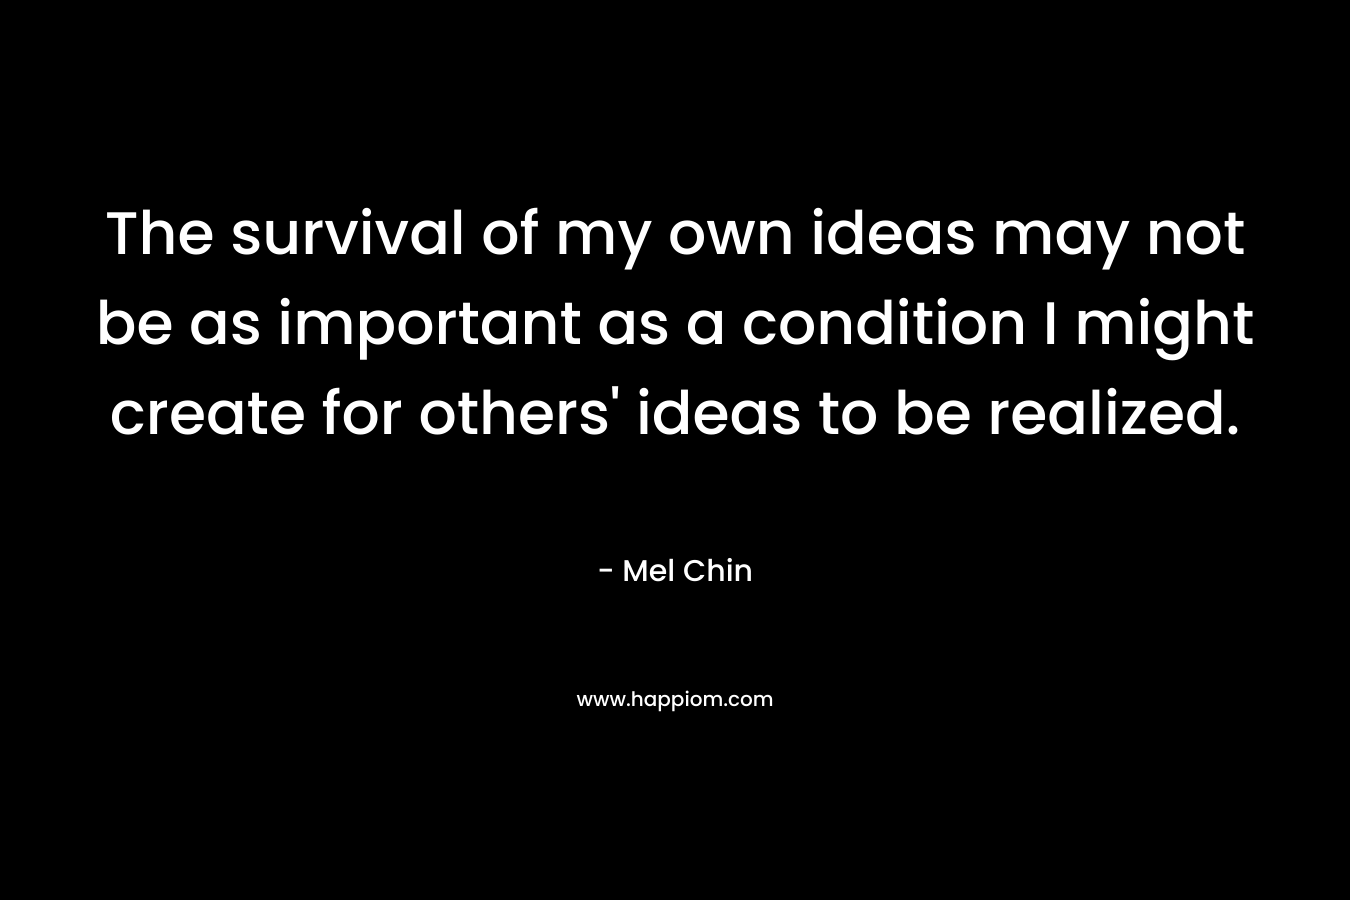 The survival of my own ideas may not be as important as a condition I might create for others' ideas to be realized.